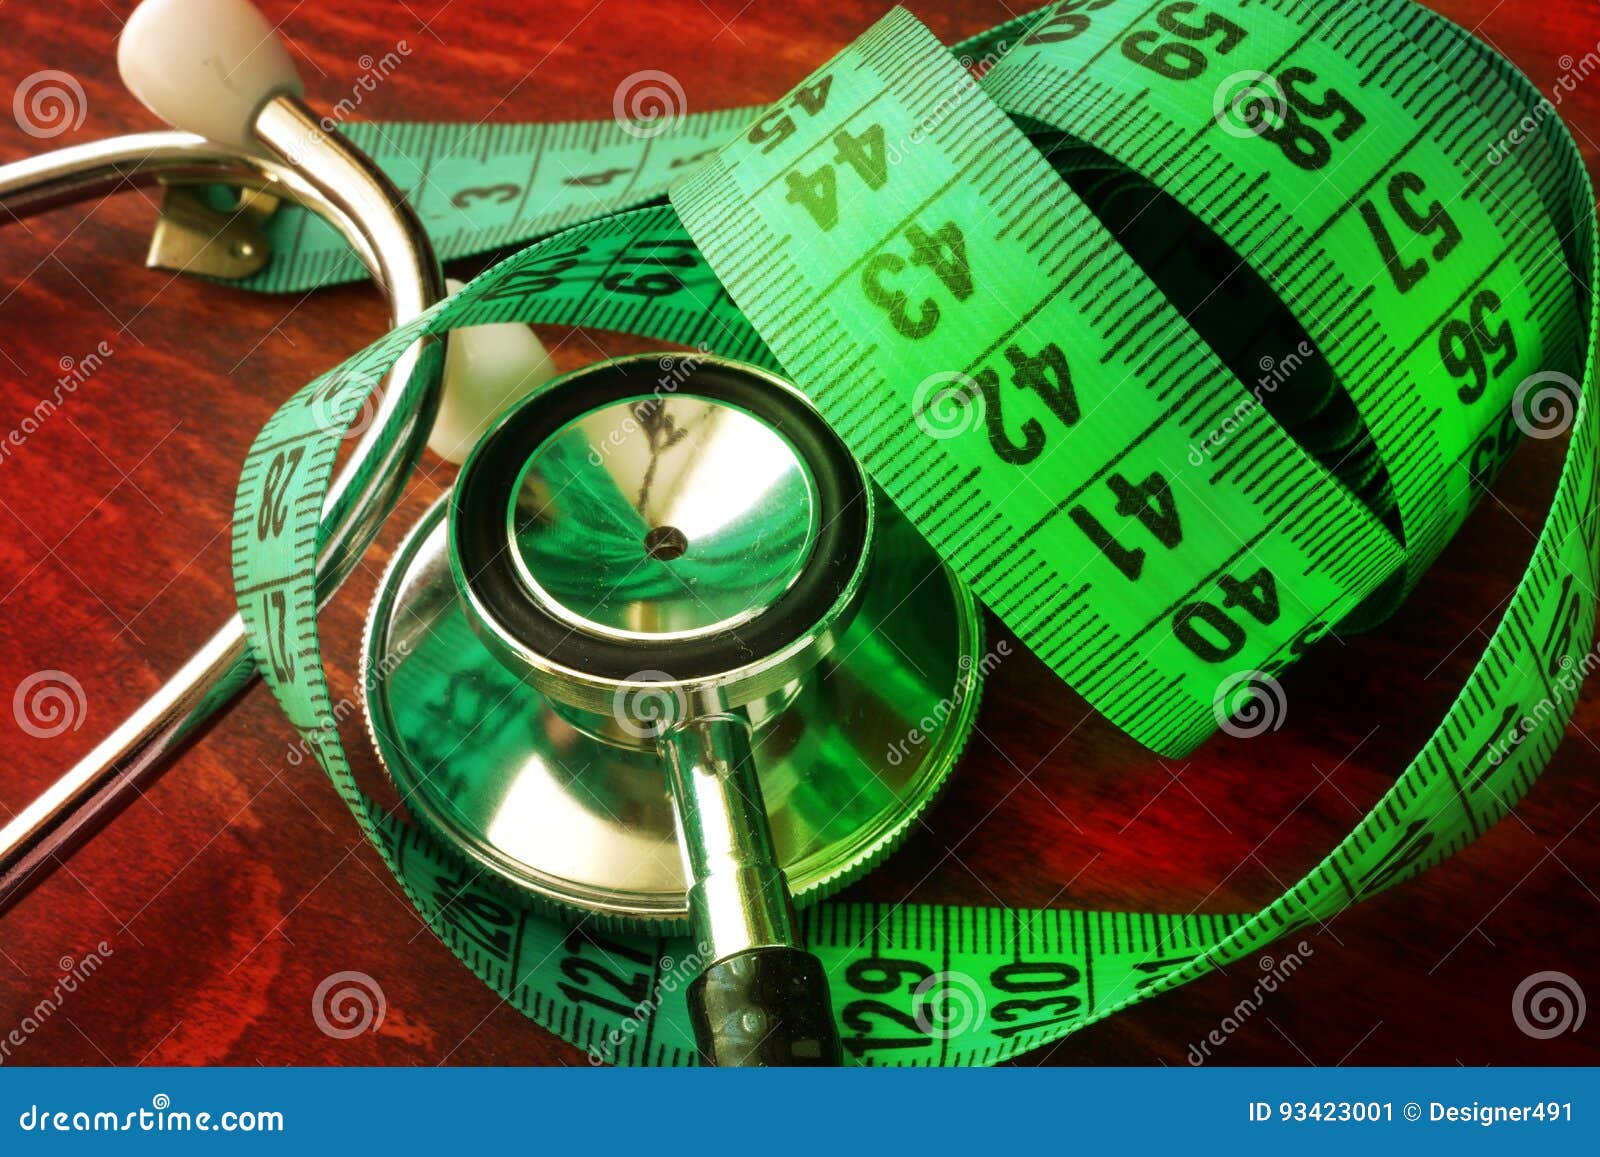 medical weight loss concept.